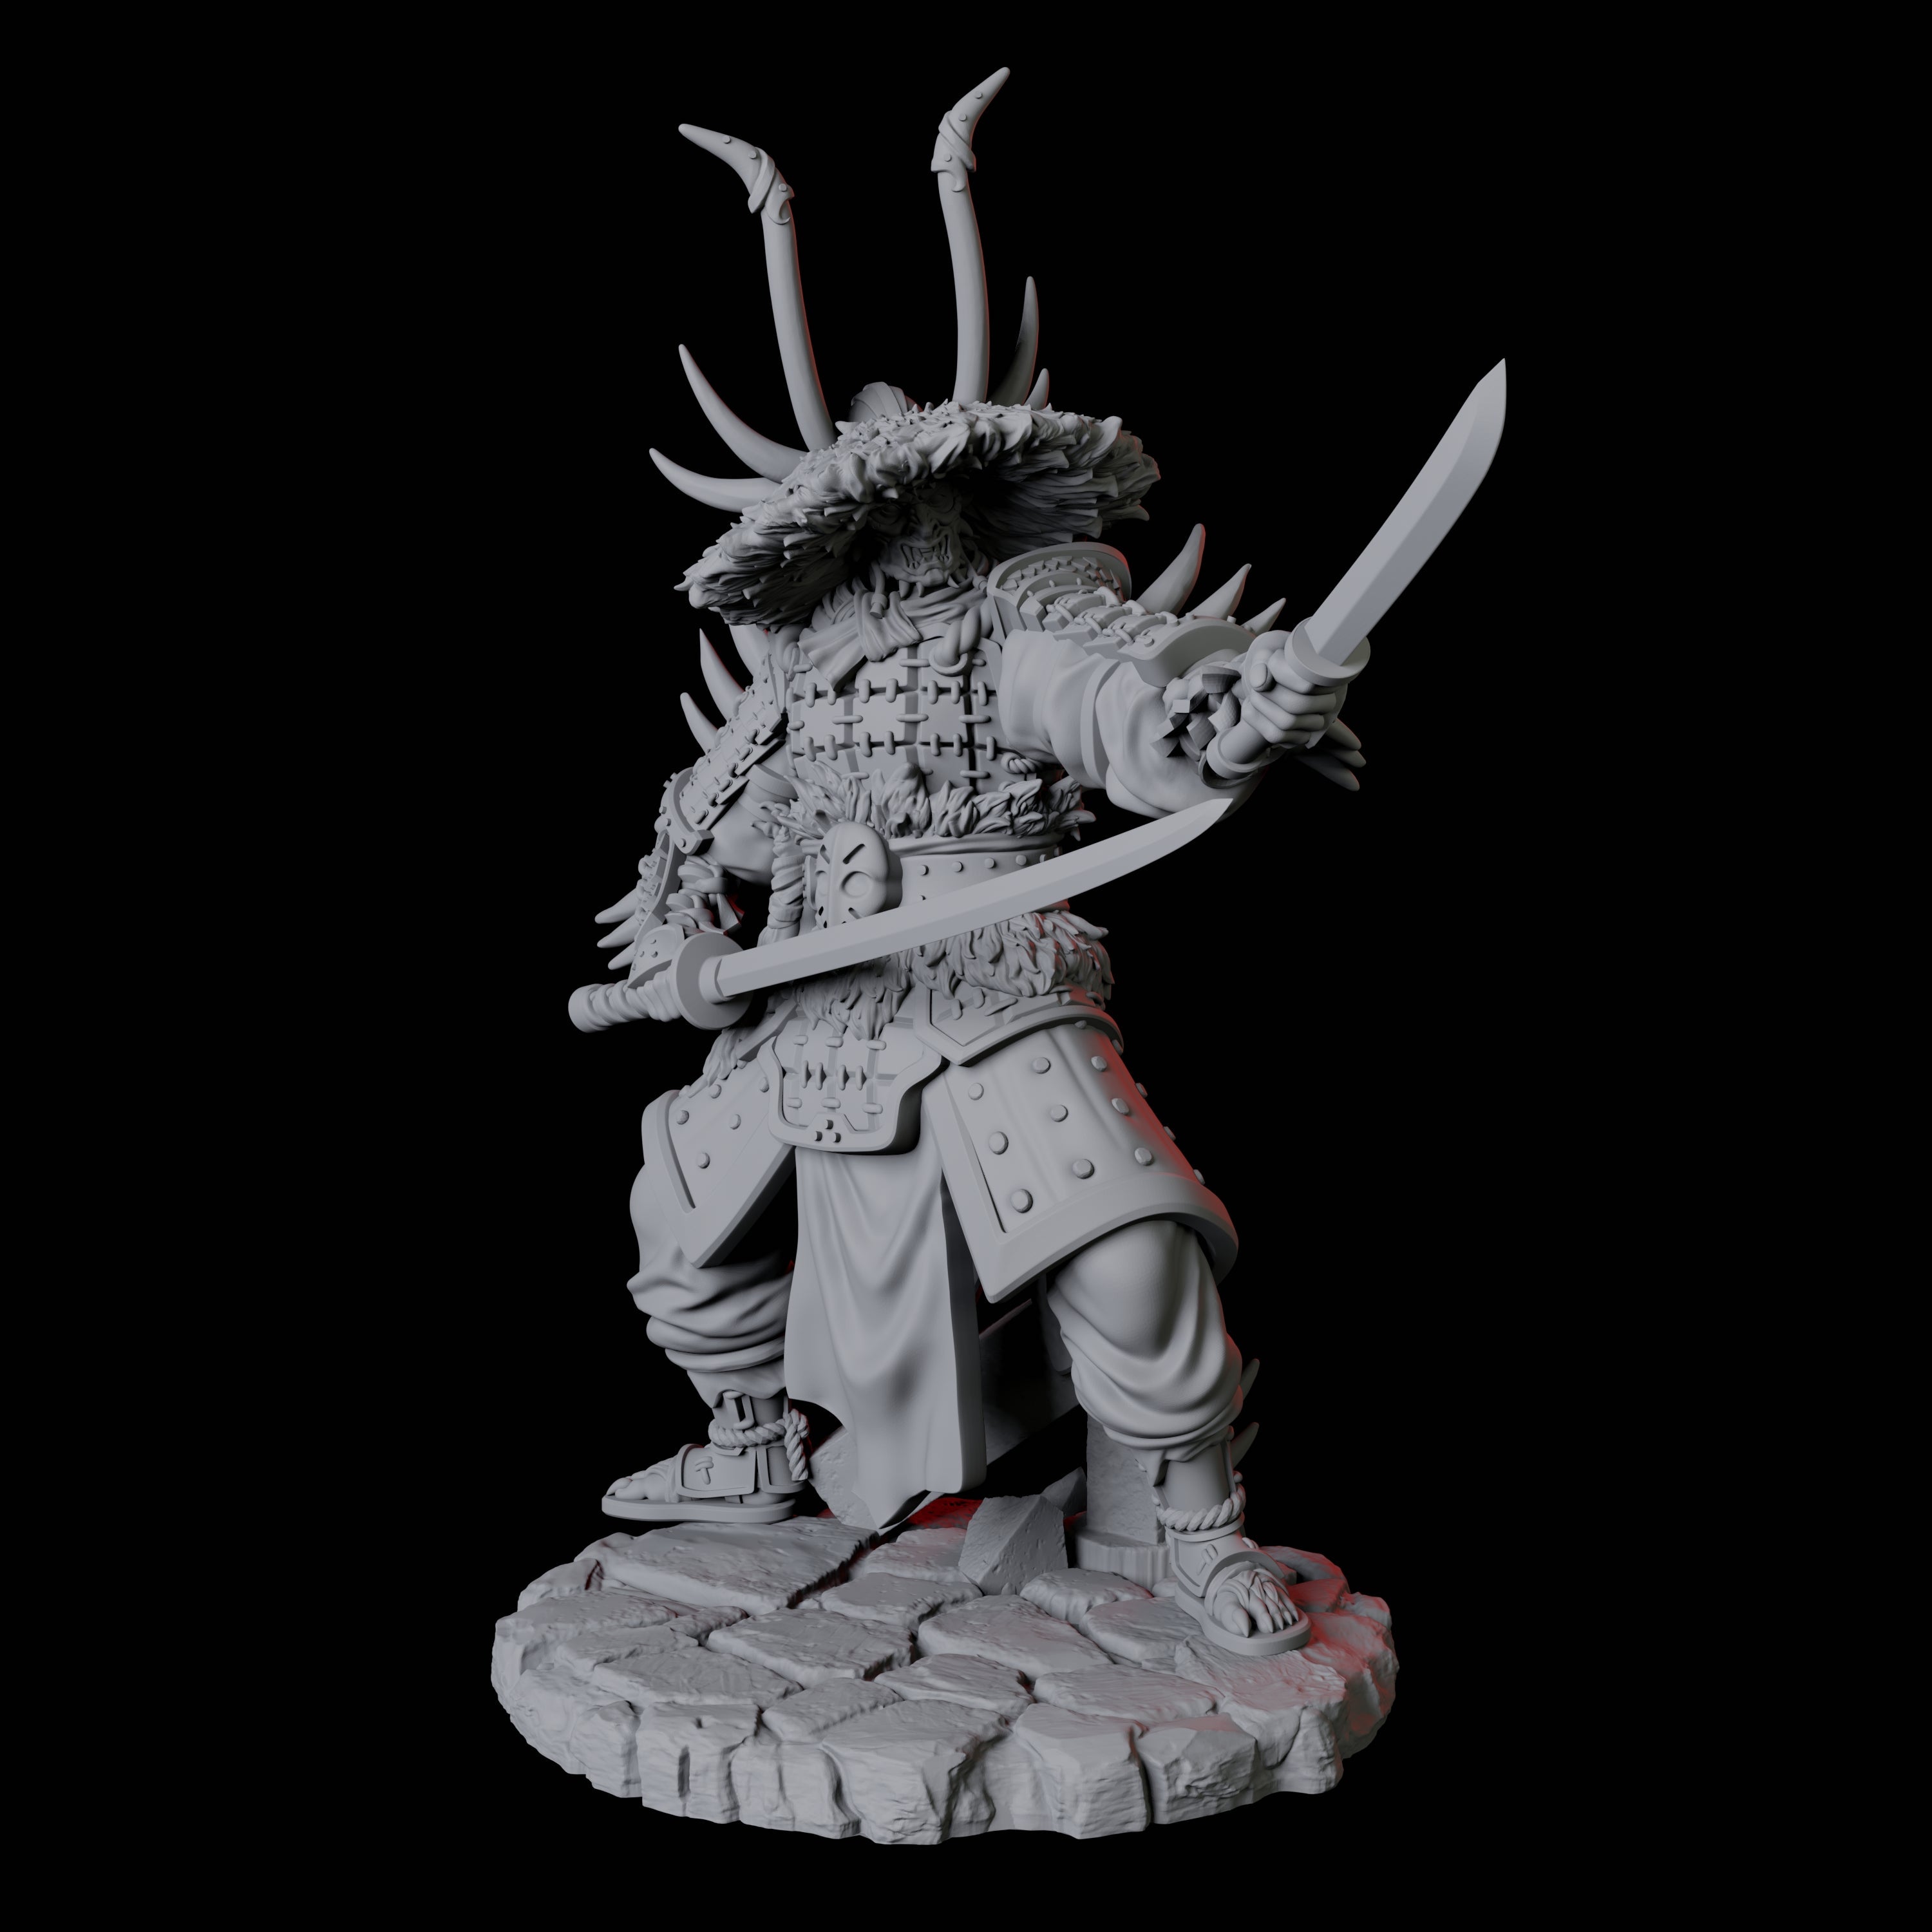 Four Oni Death Samurai Miniature for Dungeons and Dragons, Pathfinder or other TTRPGs